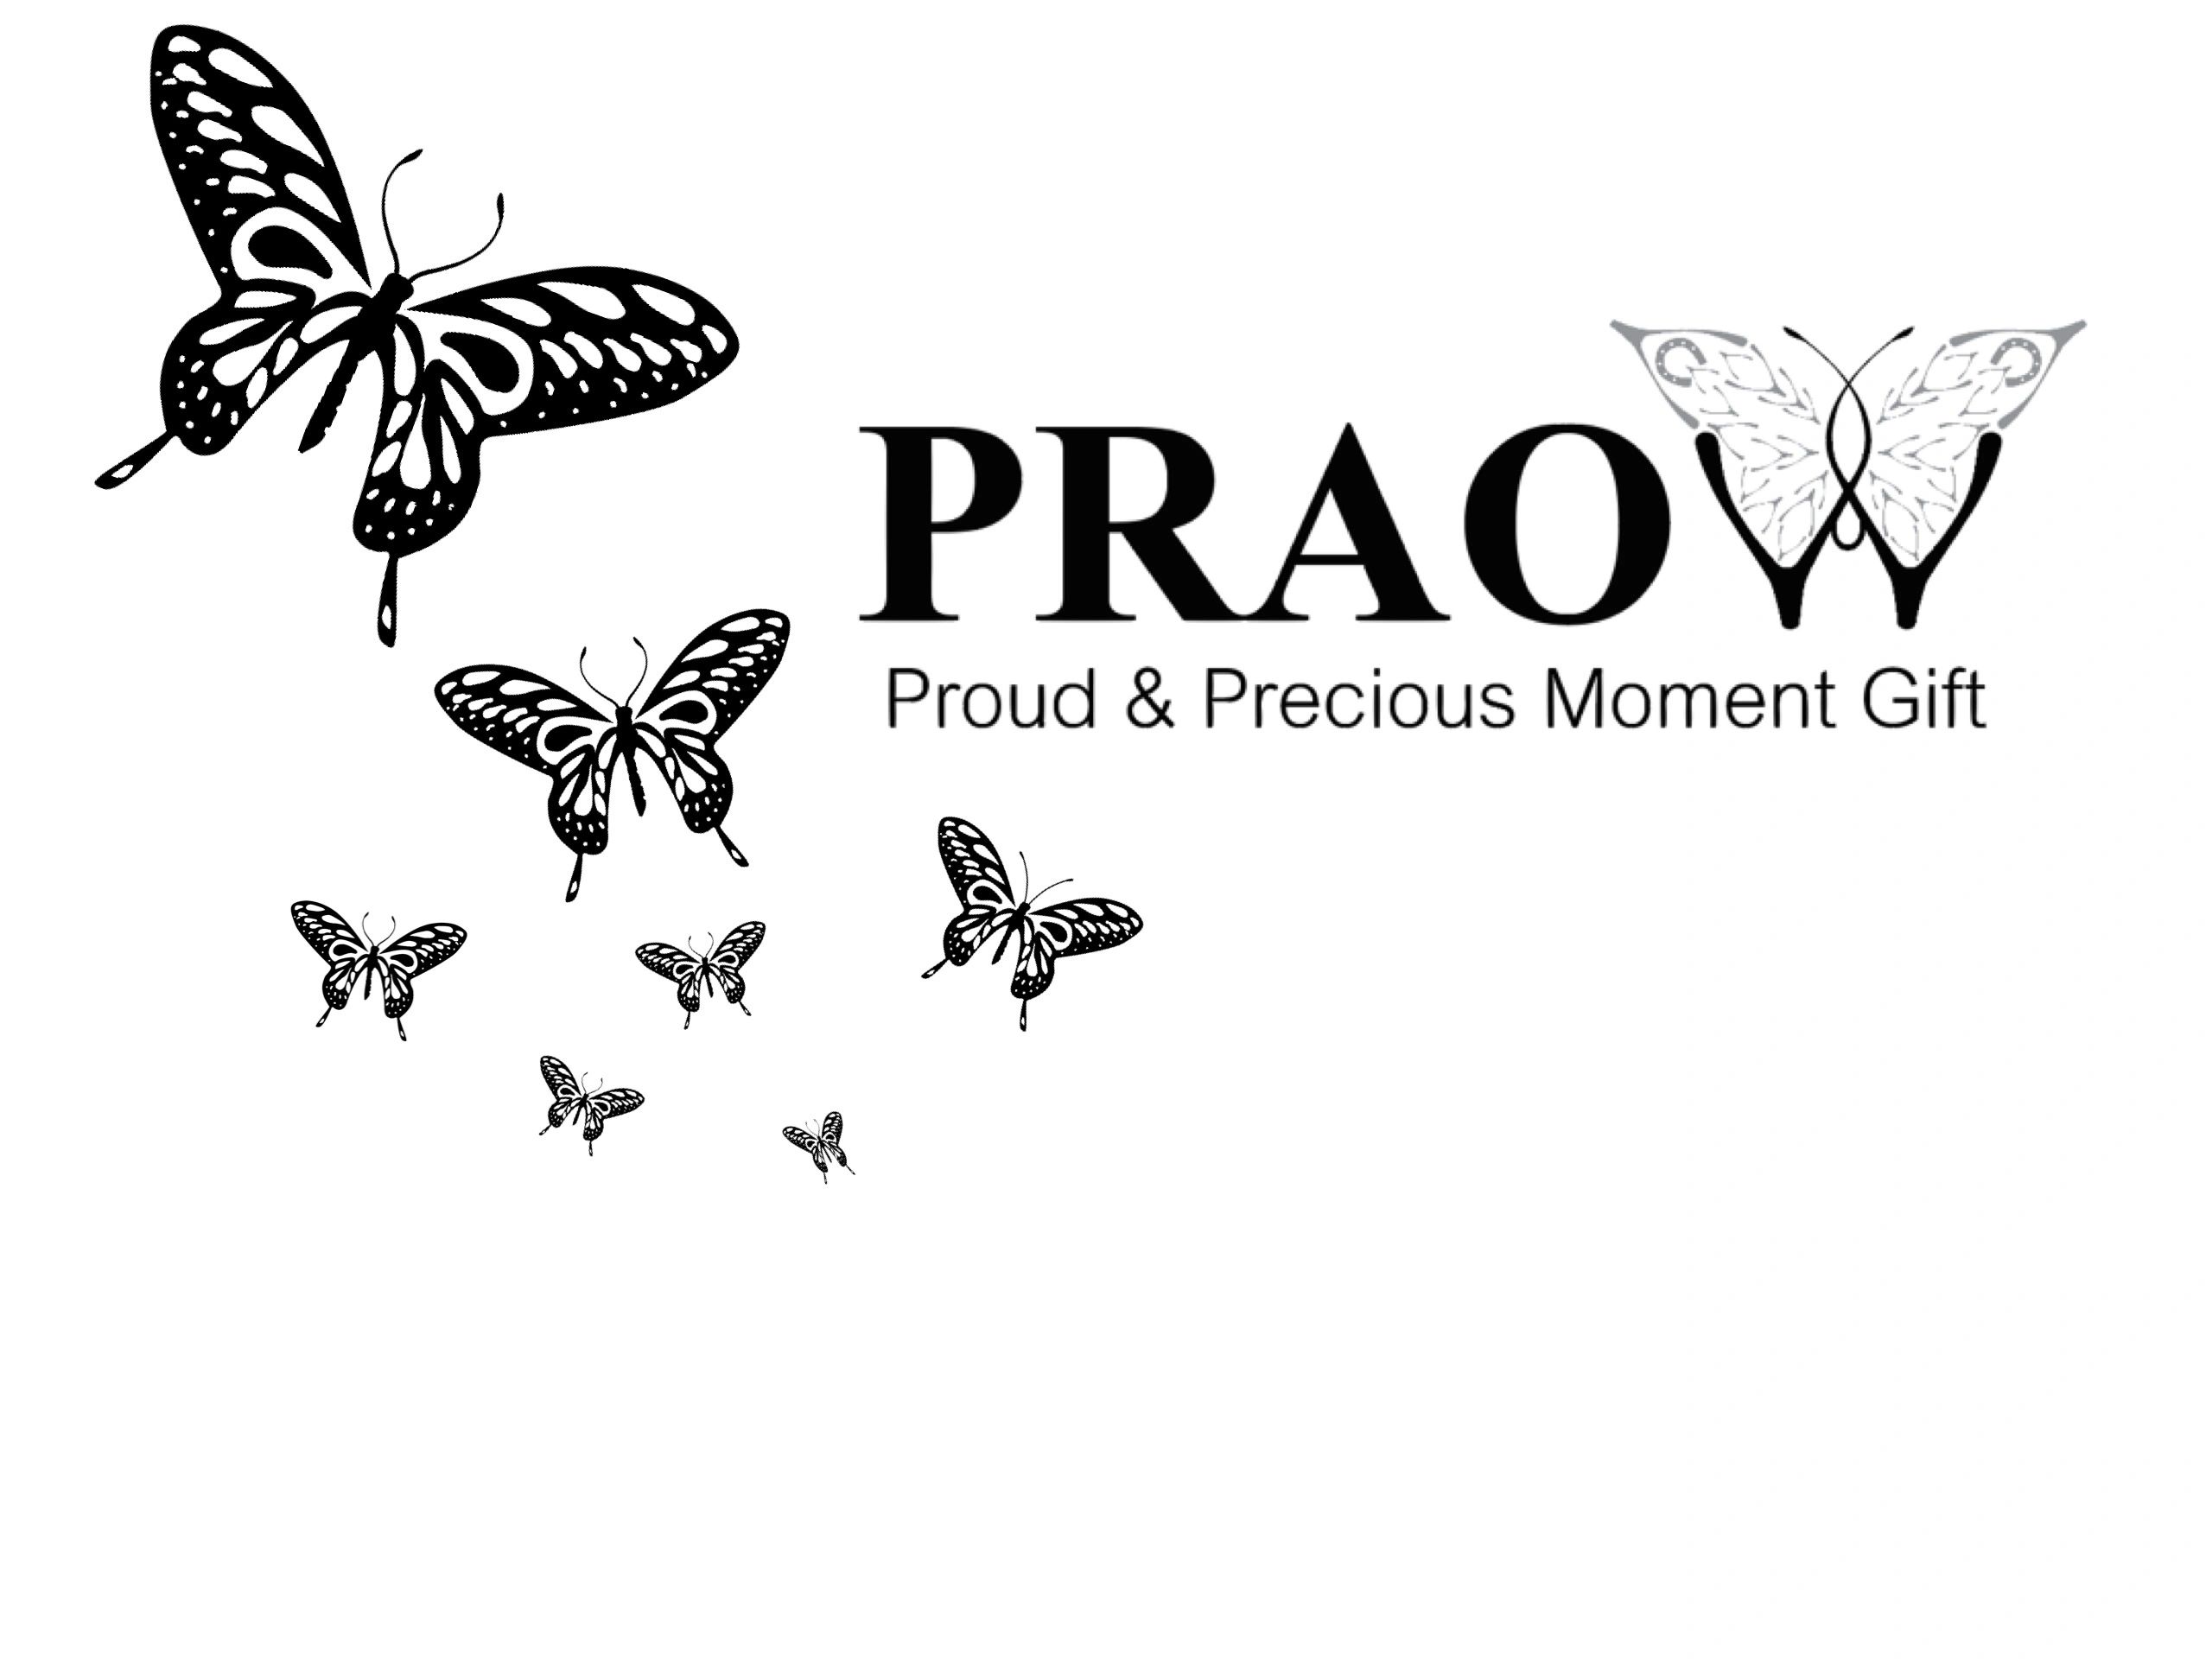 PRAOW create things by hand with our proud haert to make the precious moment gift for you.